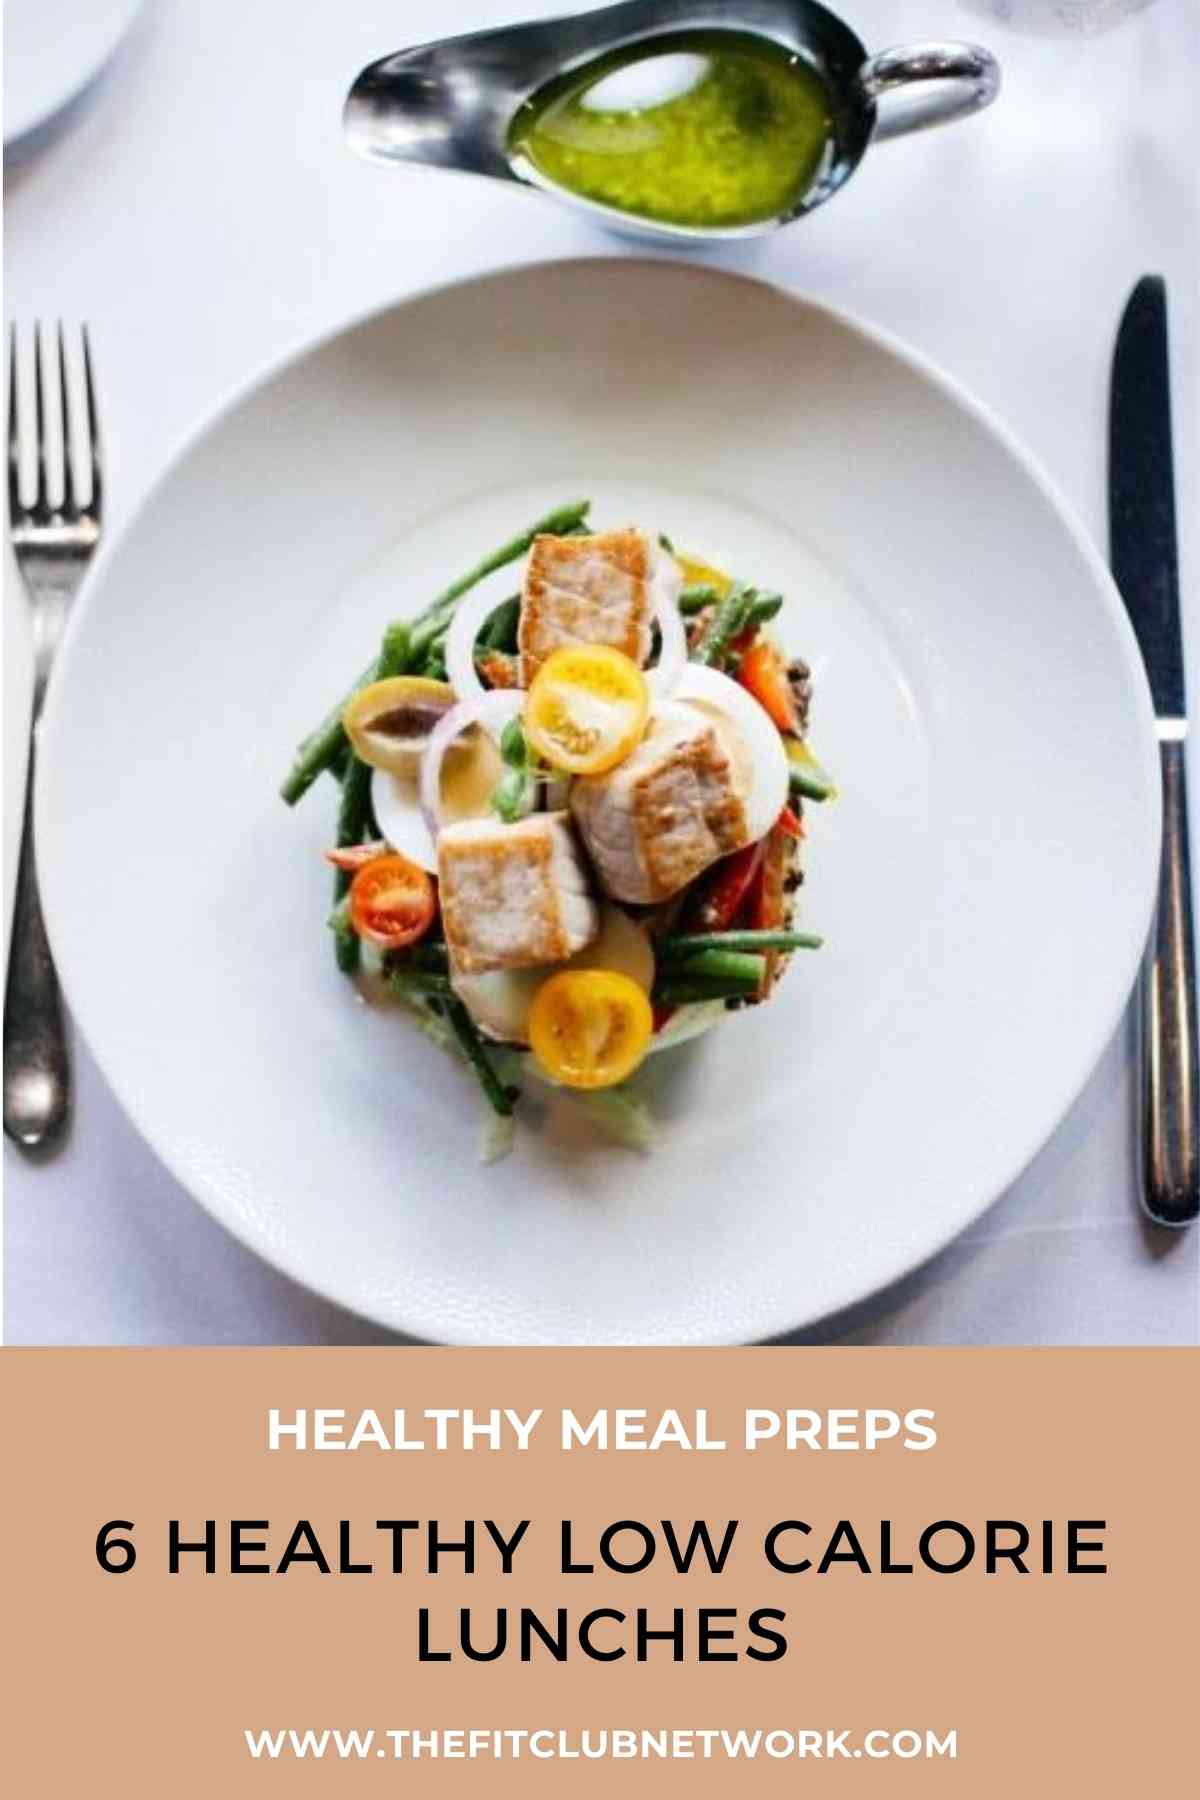 6 Healthy Low Calorie Lunches | THEFITCLUBNETWORK.COM